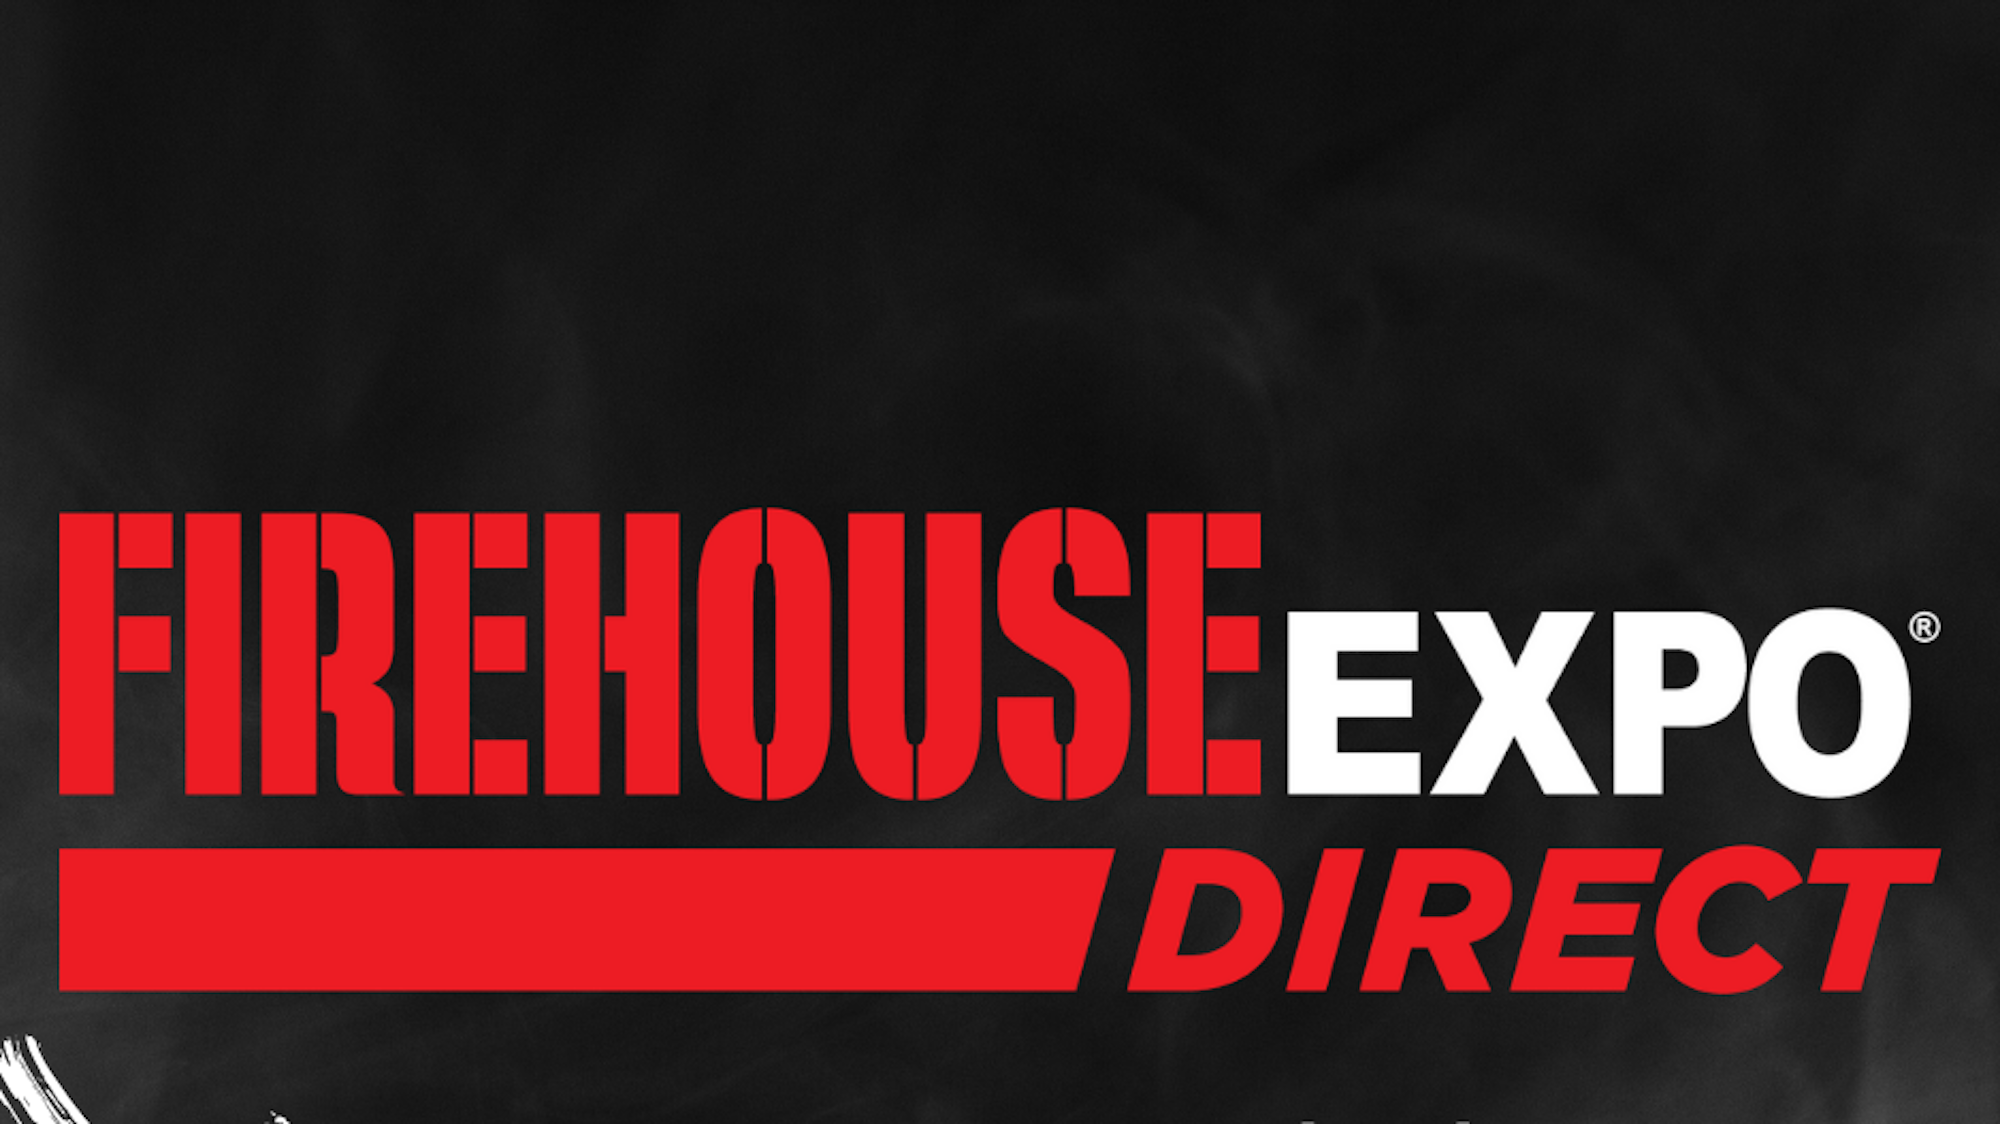 Firehouse Expo Direct Offers Unique Virtual Experience | Firehouse